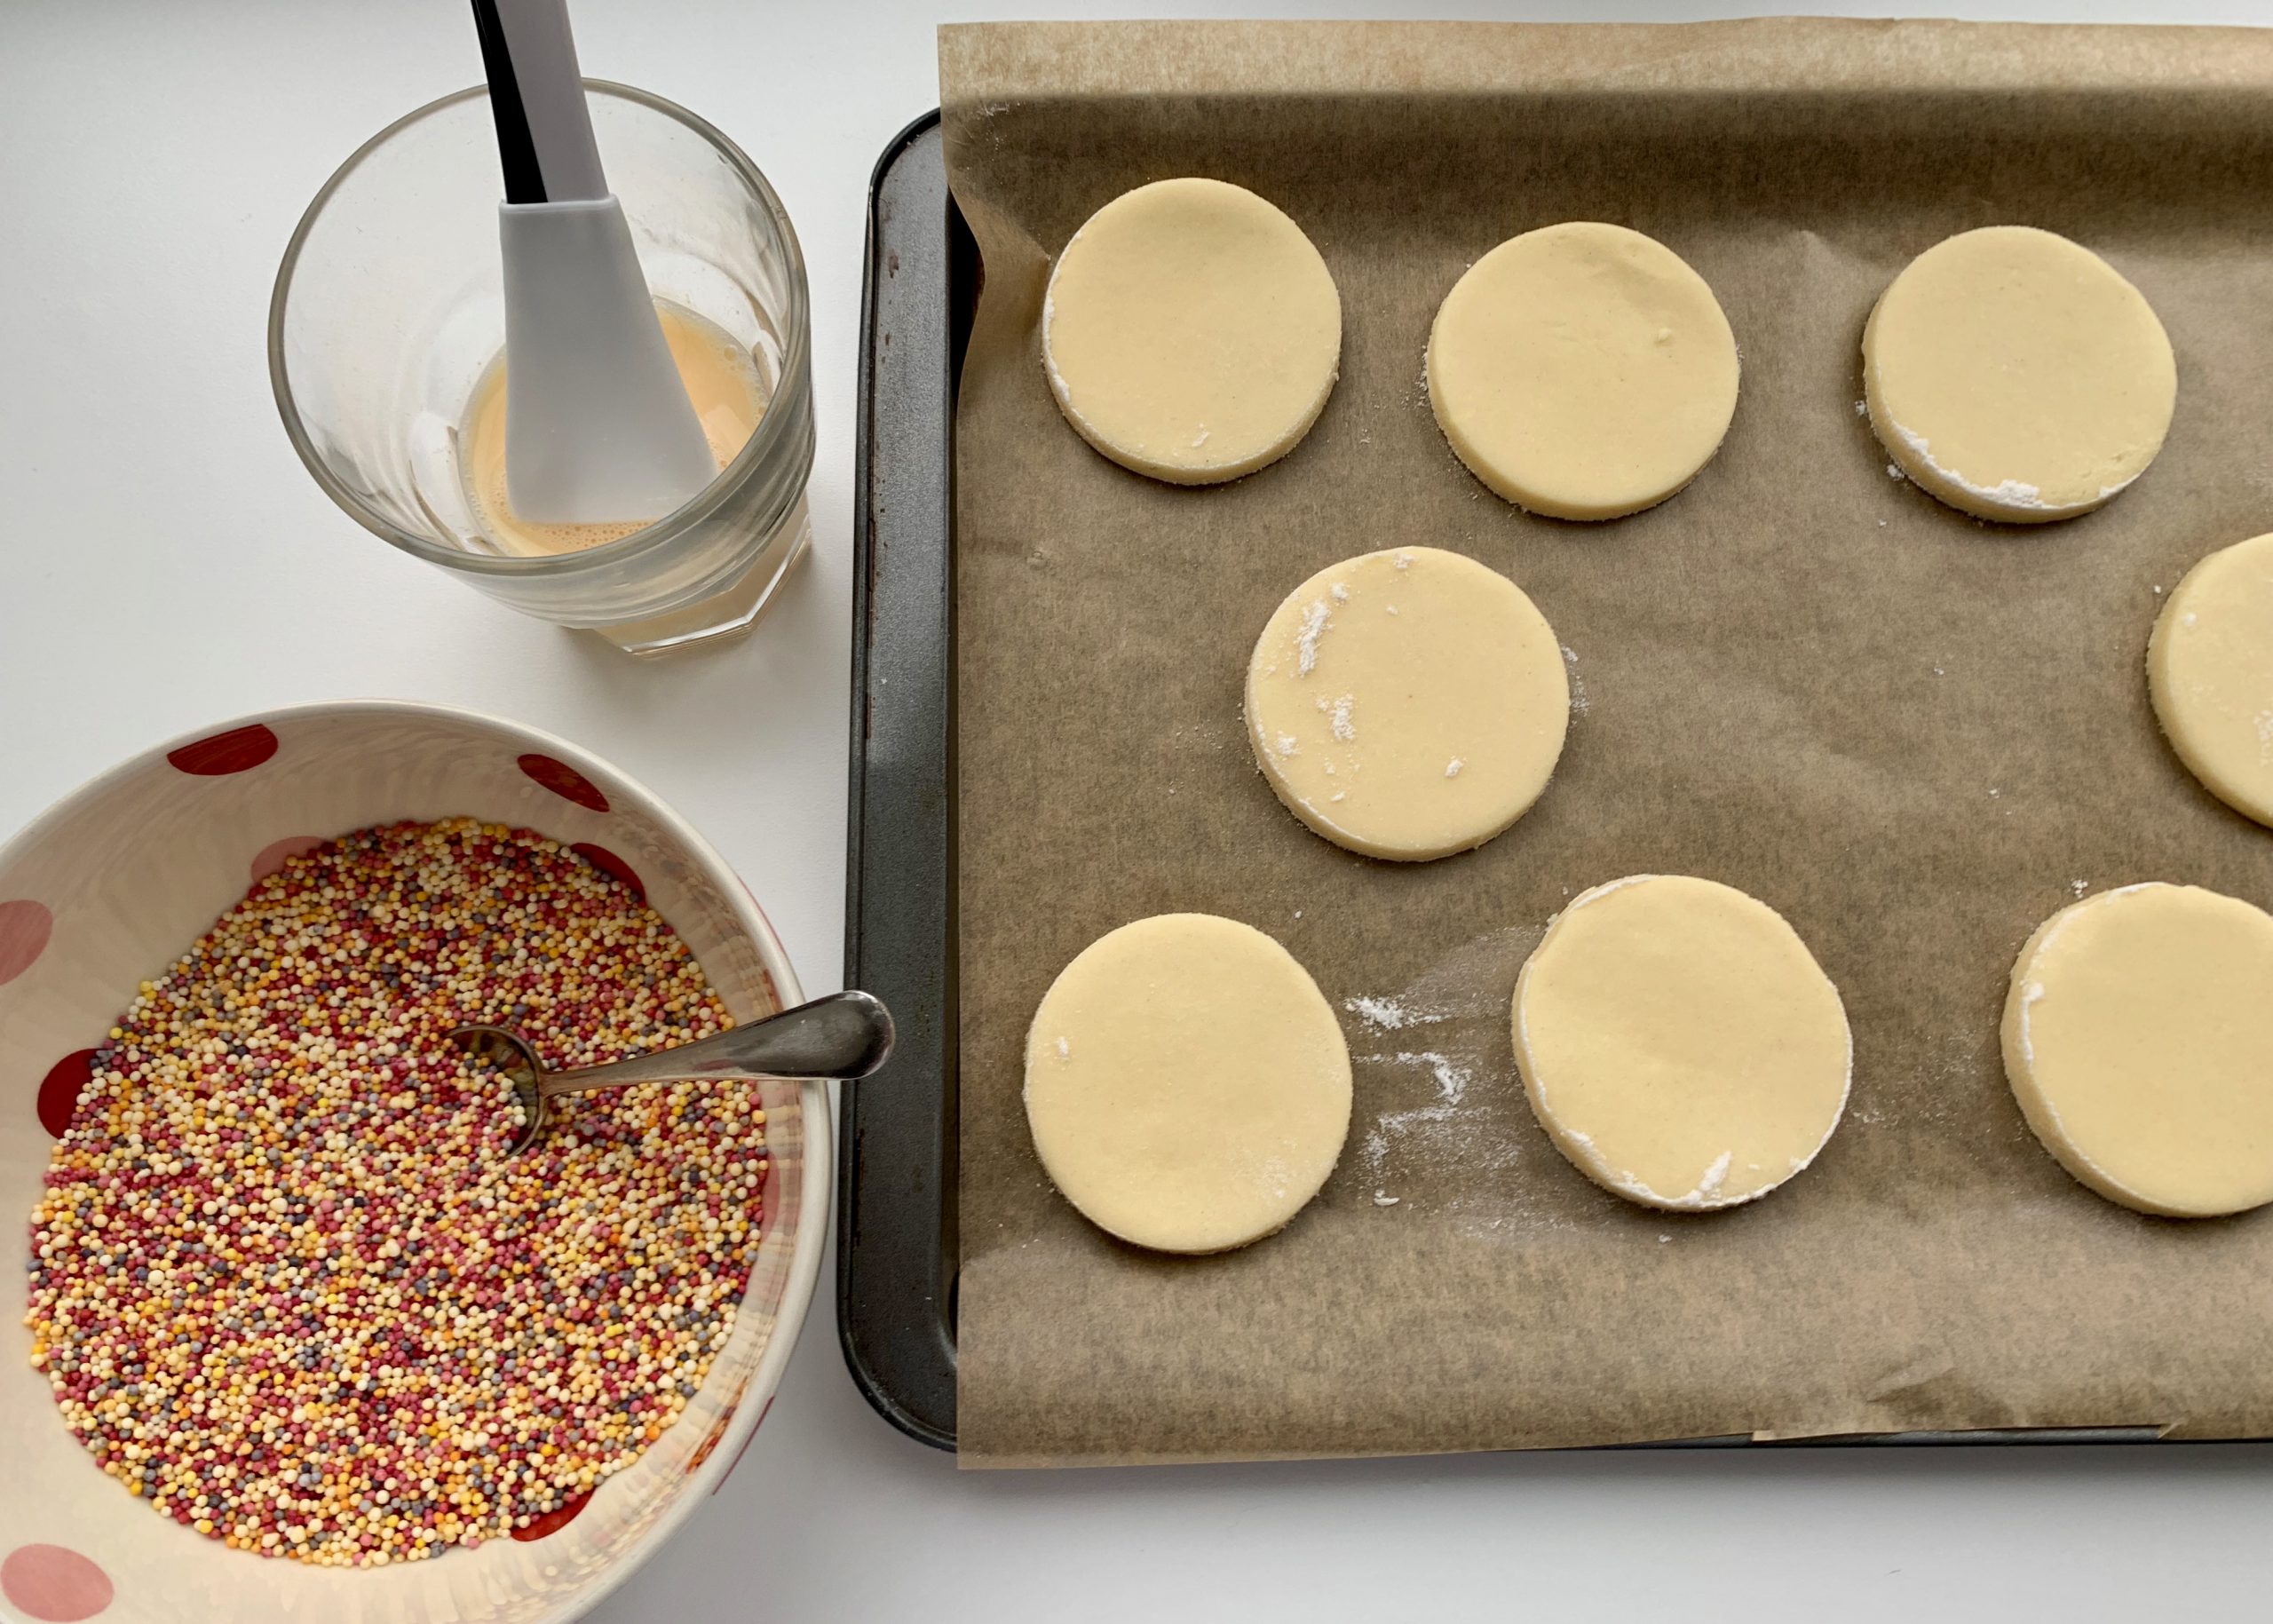 Gluten free Mexican cookies on a tray prior to having sprinkles added